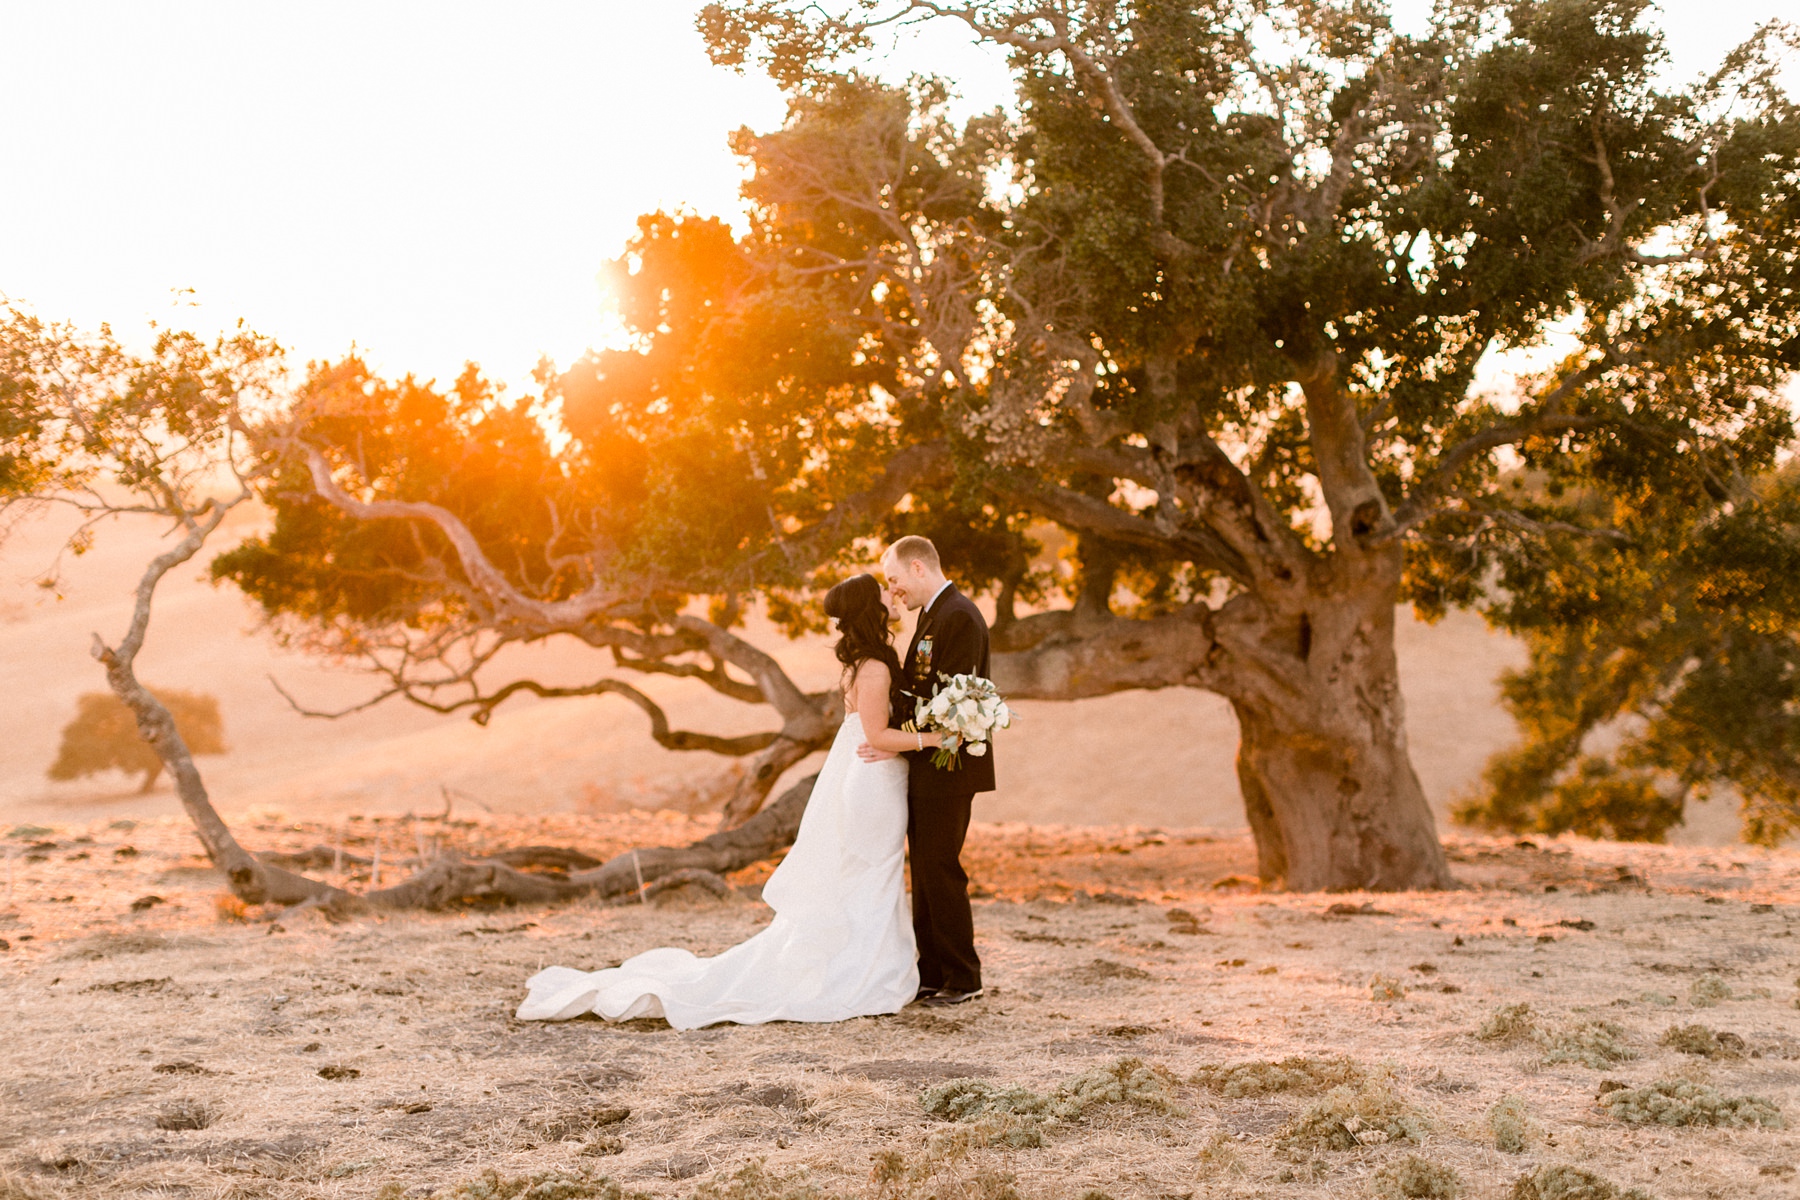 Spreafico farms wedding portraits at sunset overlooking hills of SLO